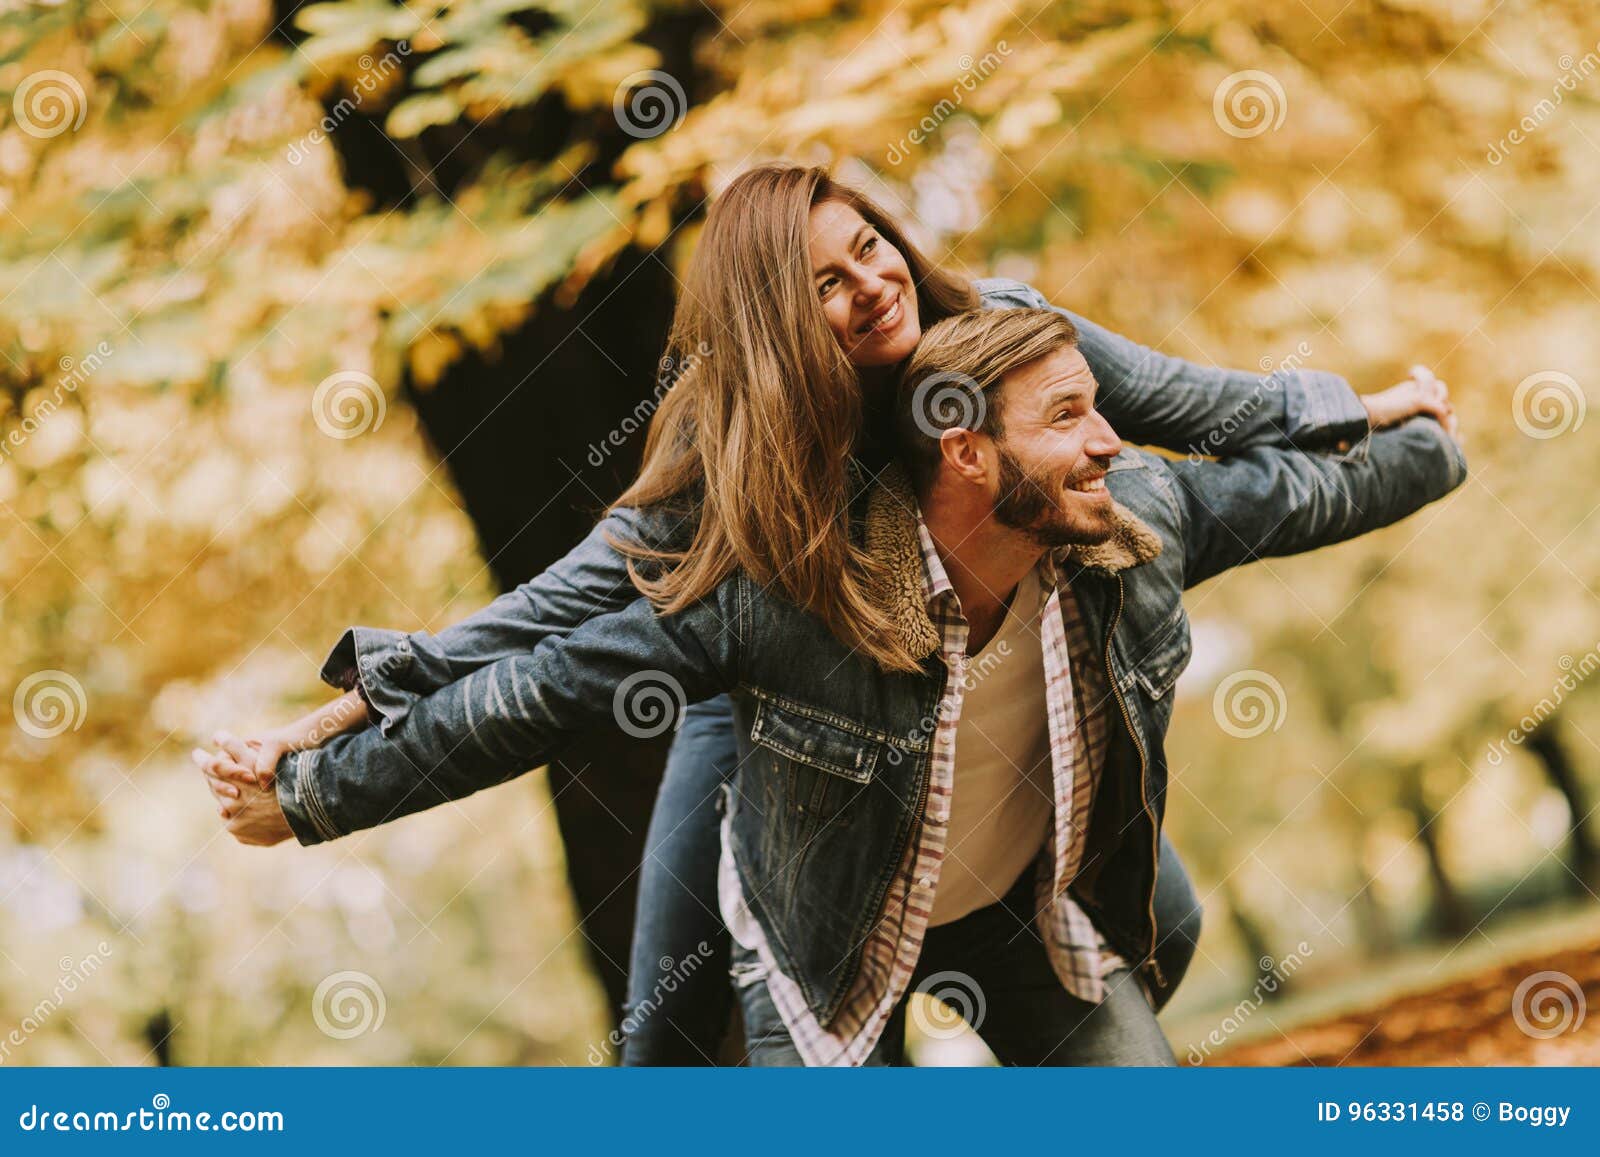 Young Loving Couple Having Fun In The Autumn Park Stock Photo Image